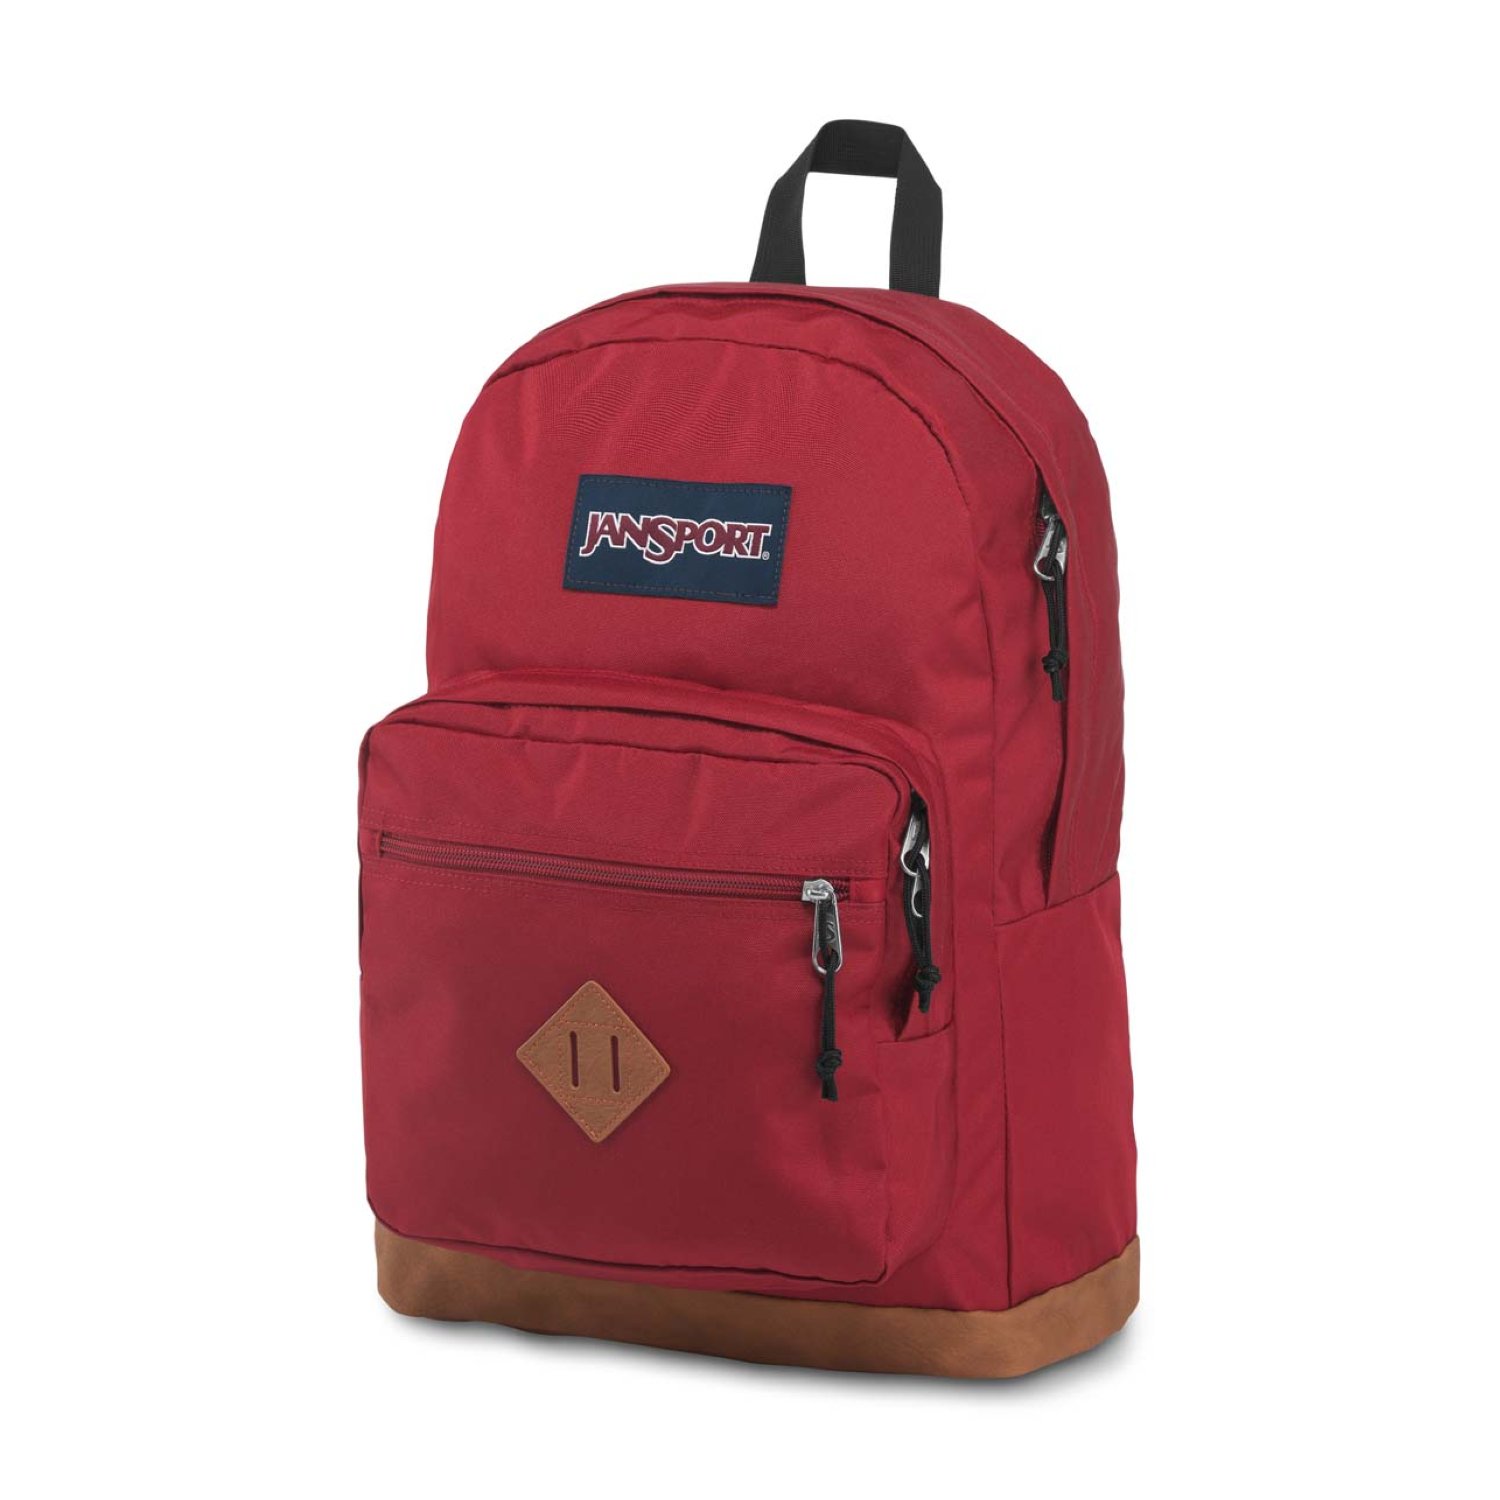 Buy Jansport City View Backpack - Viking Red in Singapore & Malaysia - The Planet Traveller